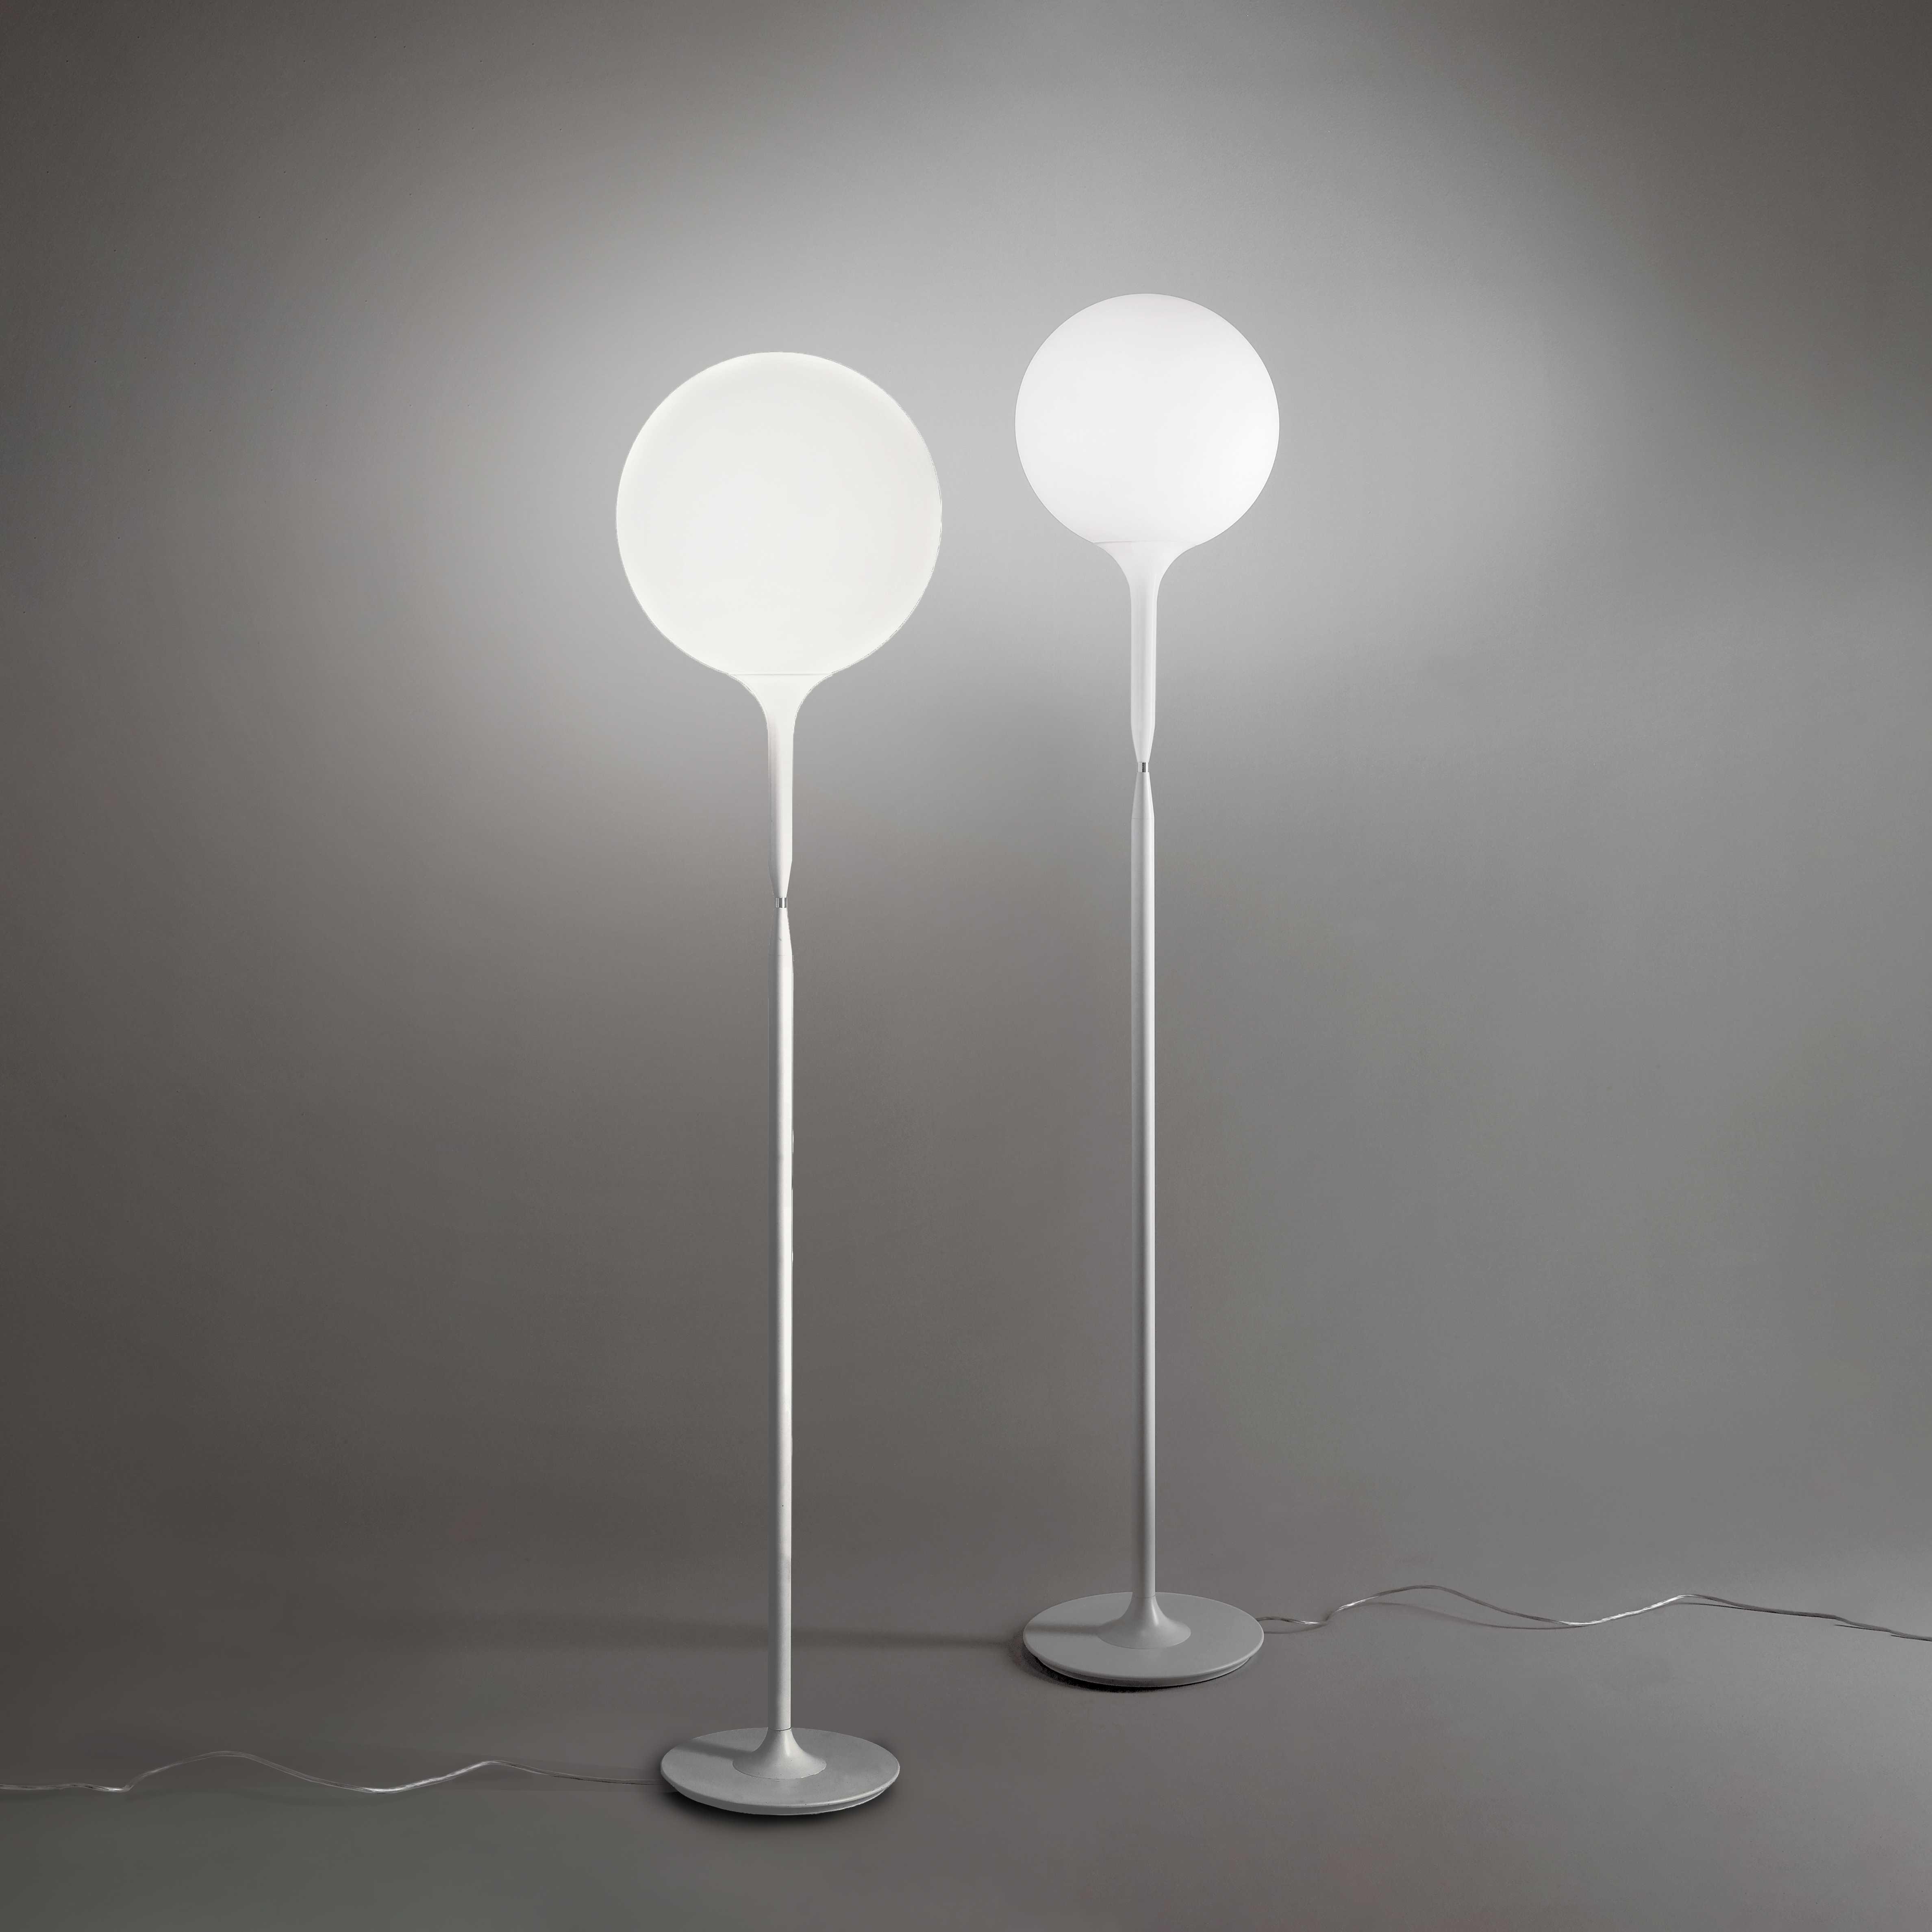 28 products for Floor | Artemide North America